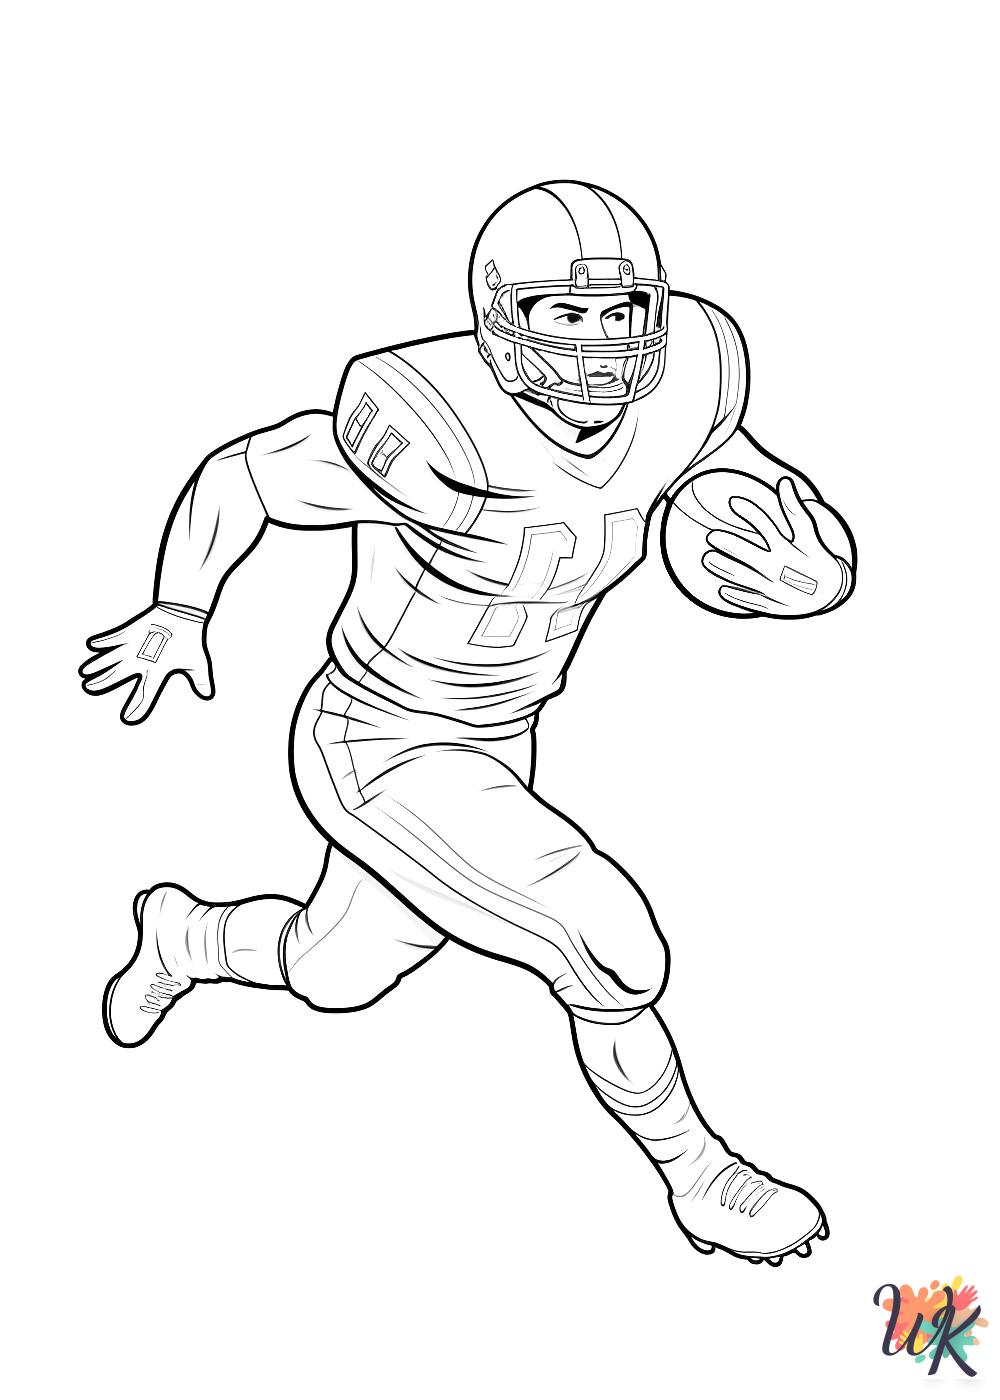 kawaii cute NFL coloring pages